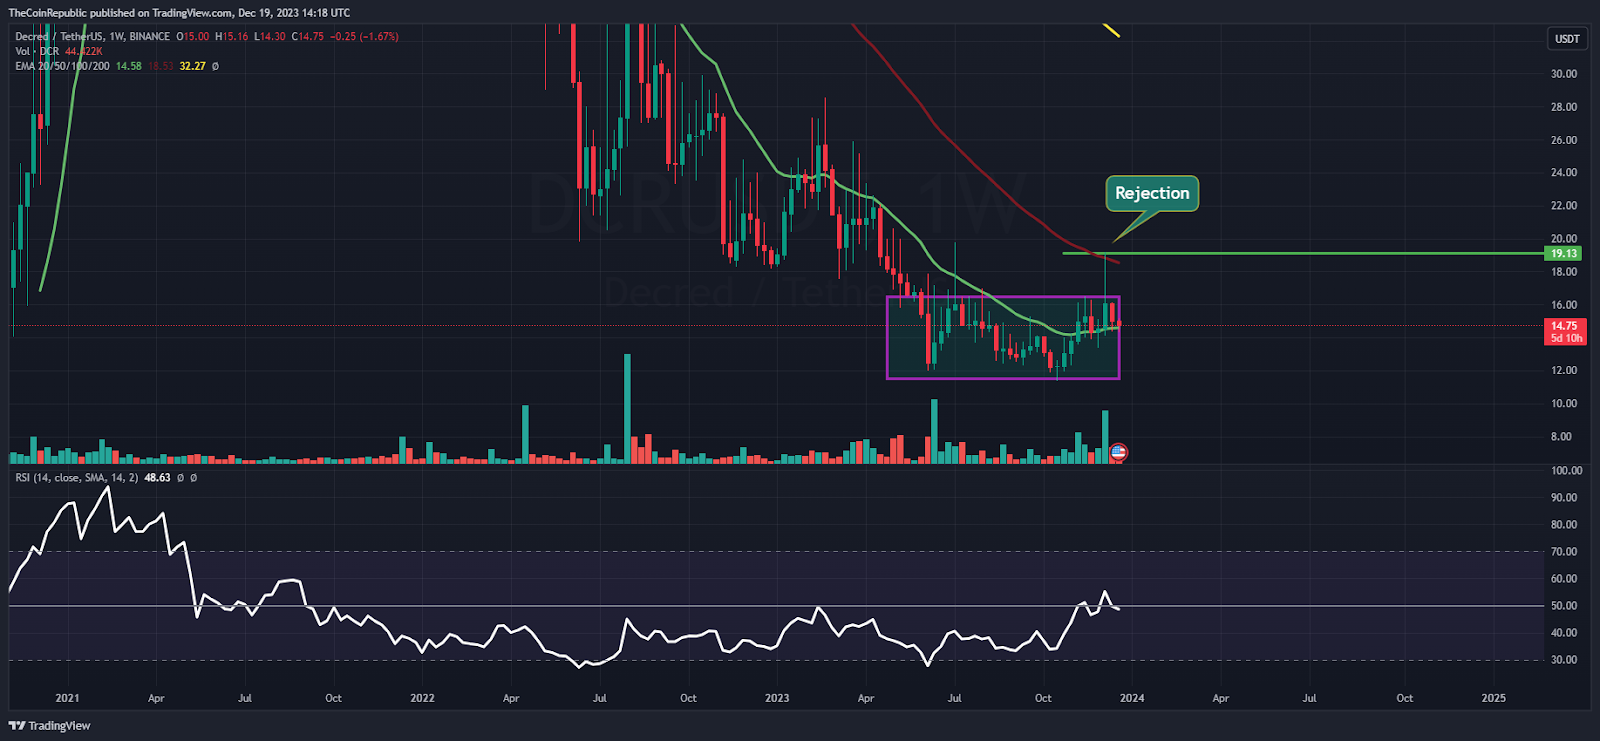 DCR Price Prediction: DCR Hovers Inside Cage, Will it Retest $20?